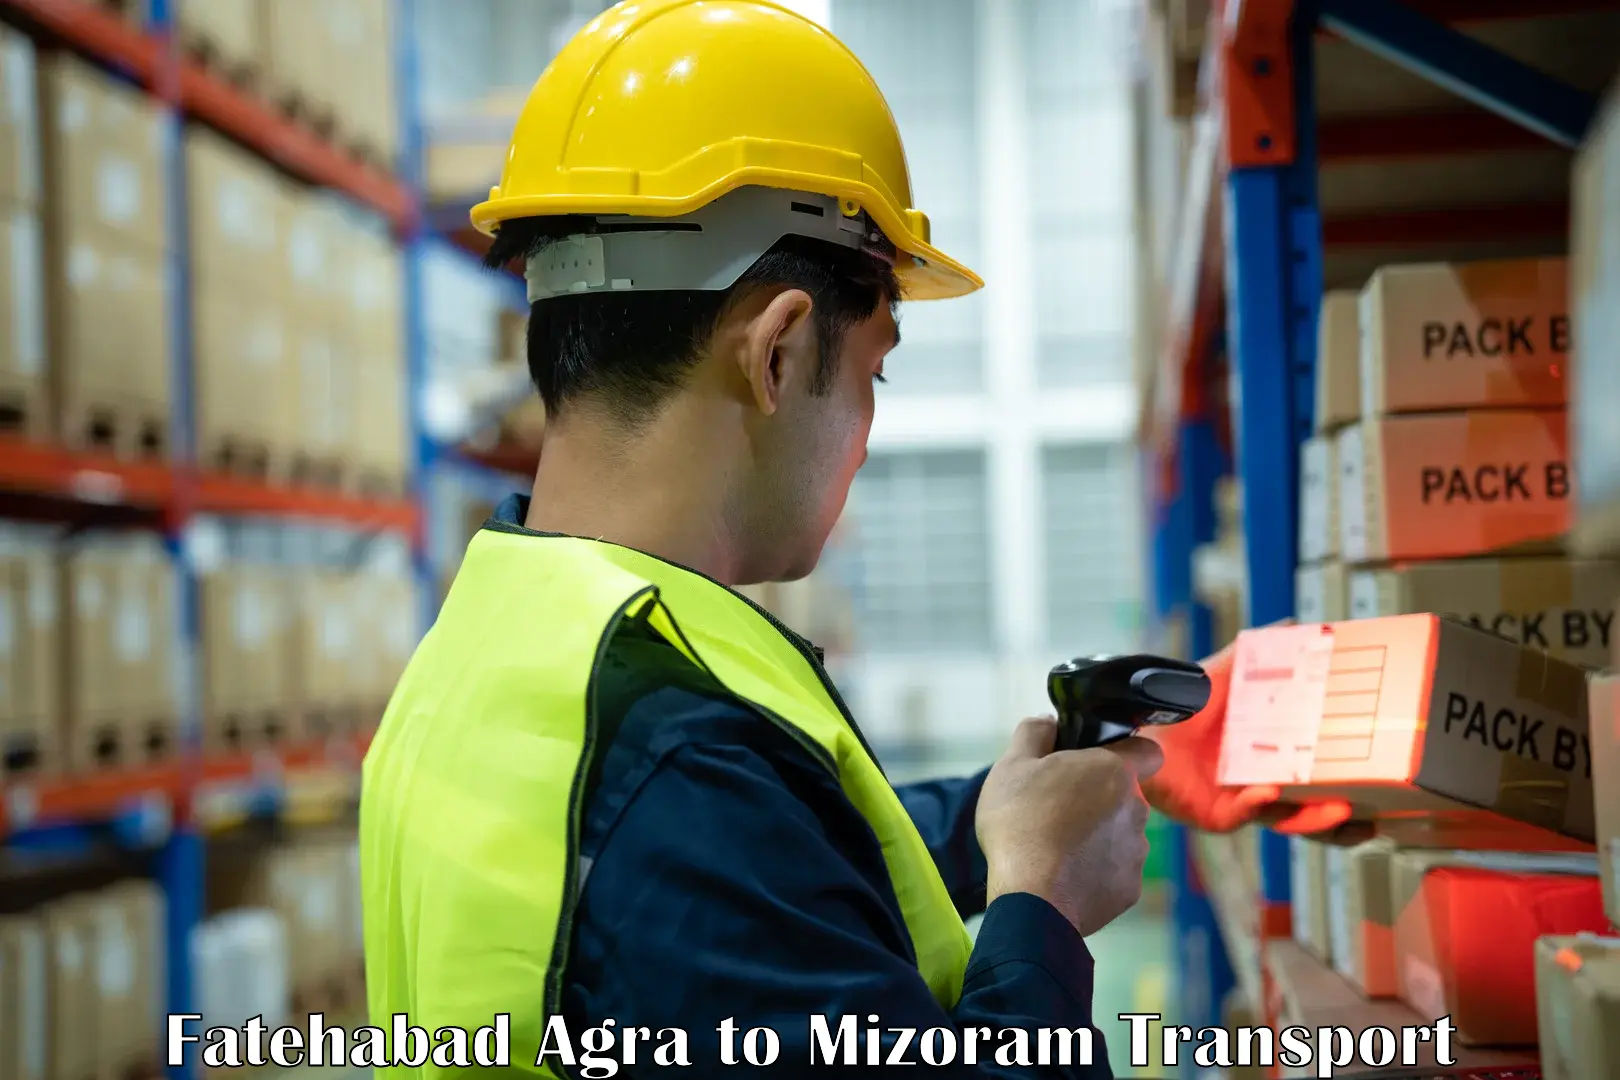 Transport shared services in Fatehabad Agra to Mizoram